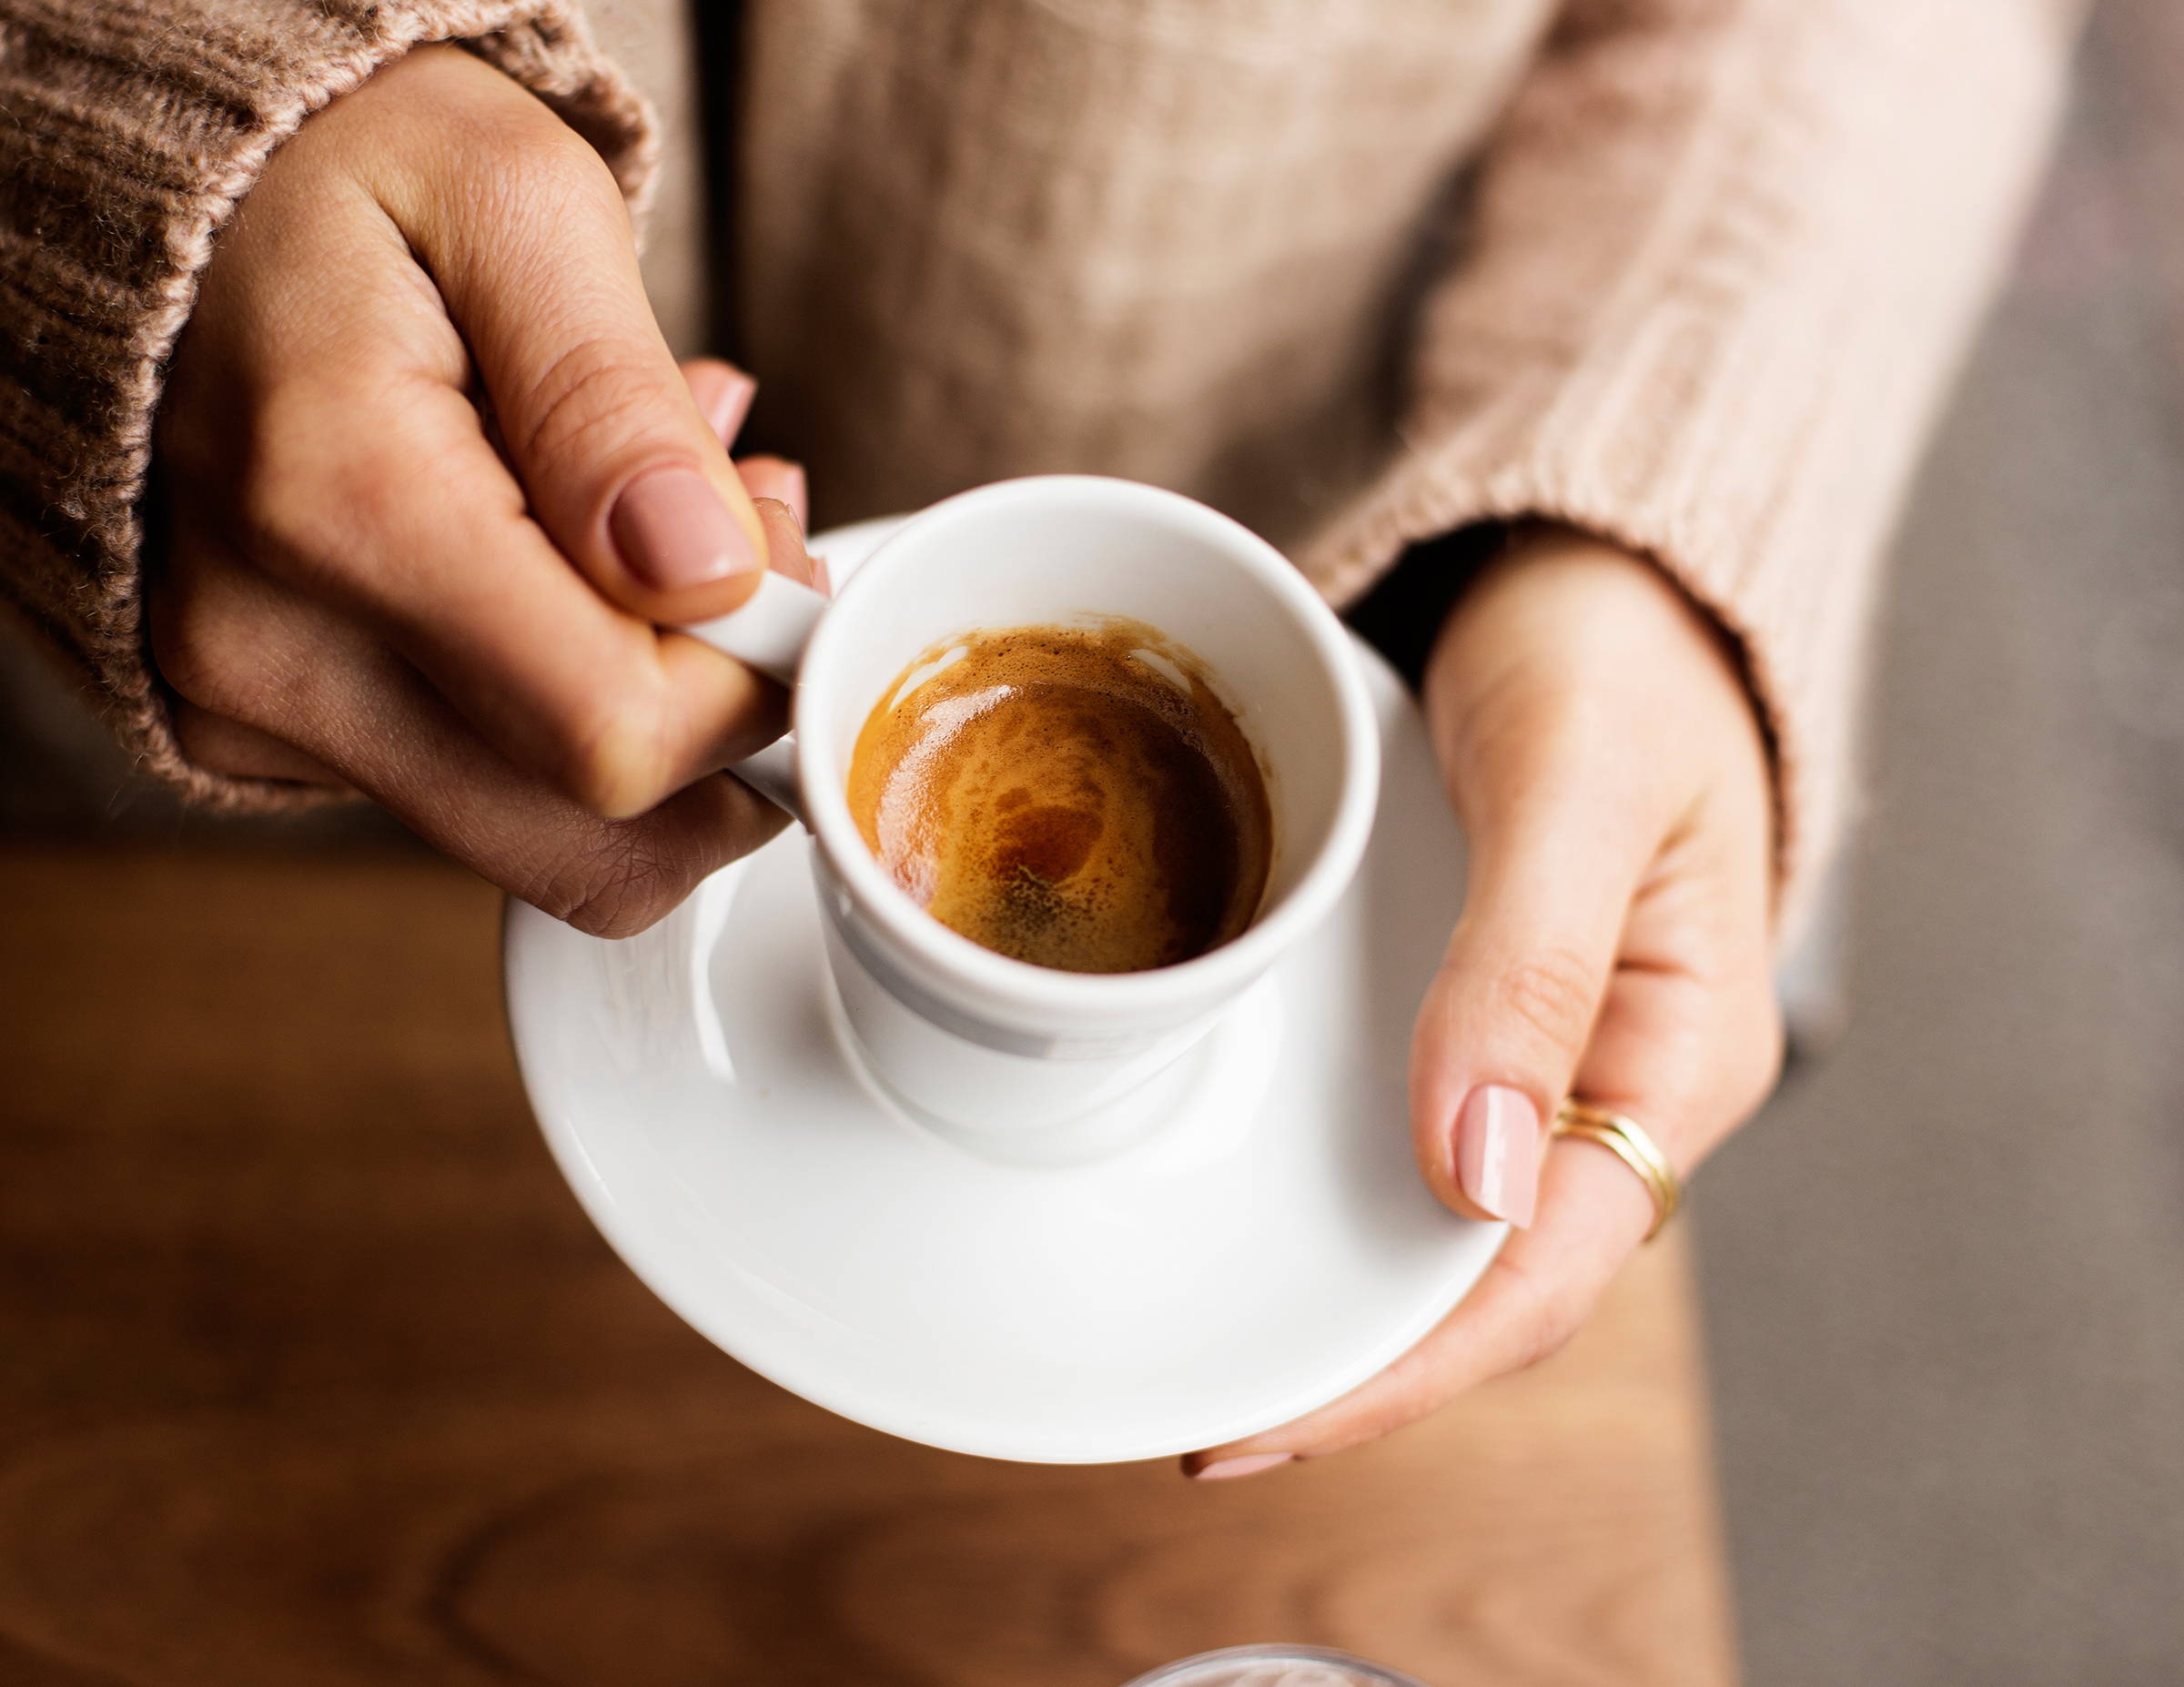 The espresso setting increases the pressure to create an espresso topped with a velvety crema